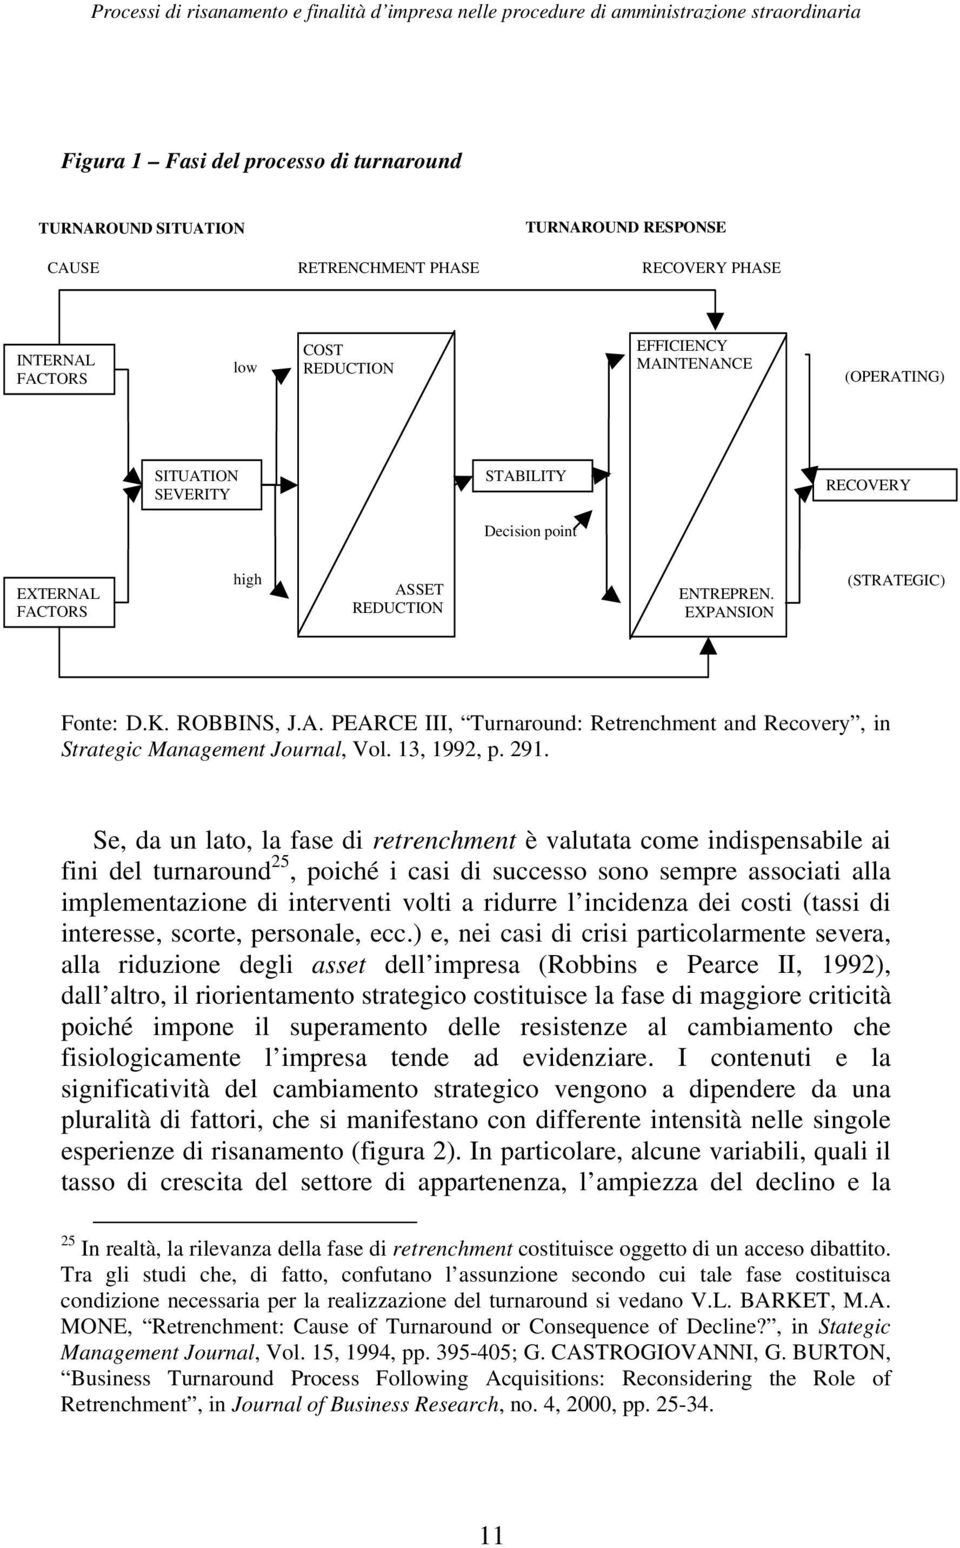 EXPANSION (STRATEGIC) Fonte: D.K. ROBBINS, J.A. PEARCE III, Turnaround: Retrenchment and Recovery, in Strategic Management Journal, Vol. 13, 1992, p. 291.